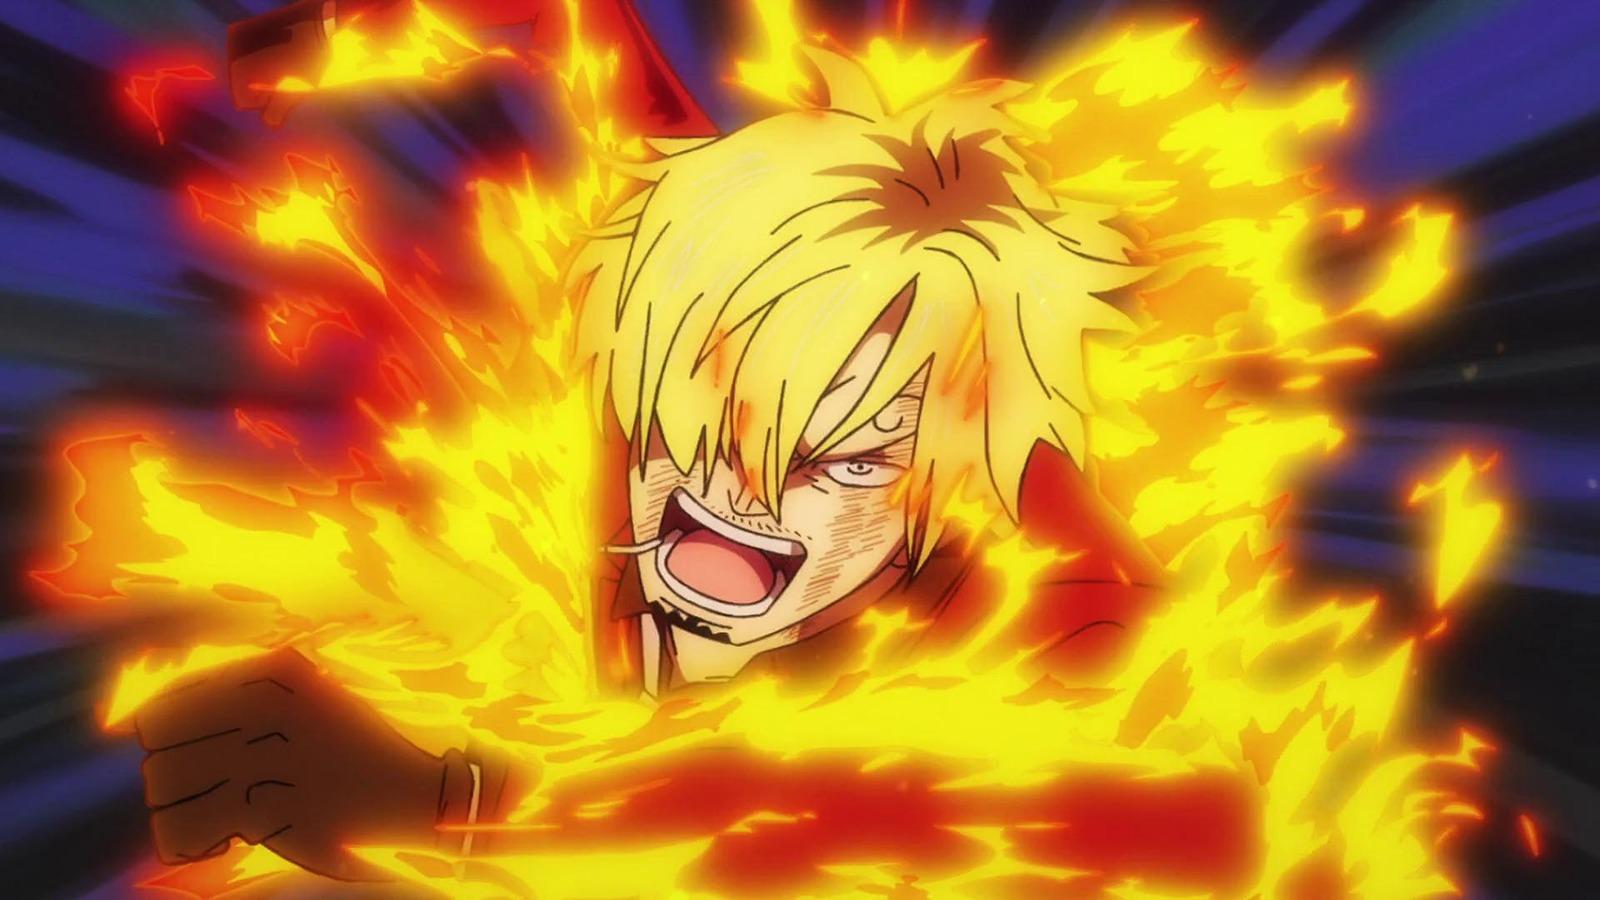 An image of Sanji's Diable Jambe in One Piece